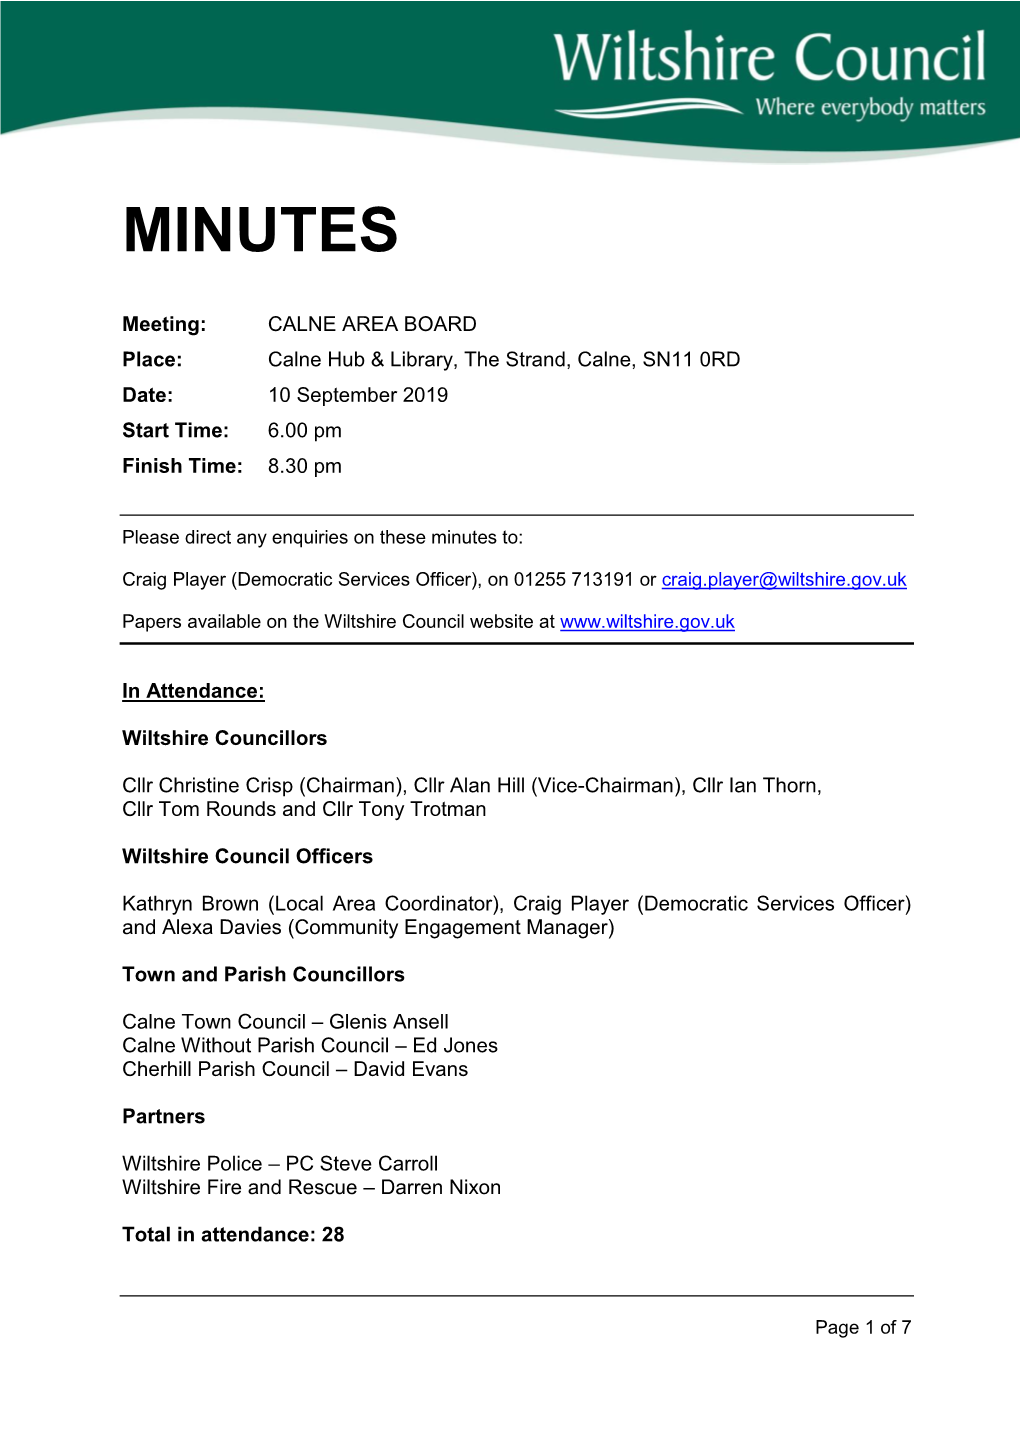 (Public Pack)Minutes Document for Calne Area Board, 10/09/2019 18:00